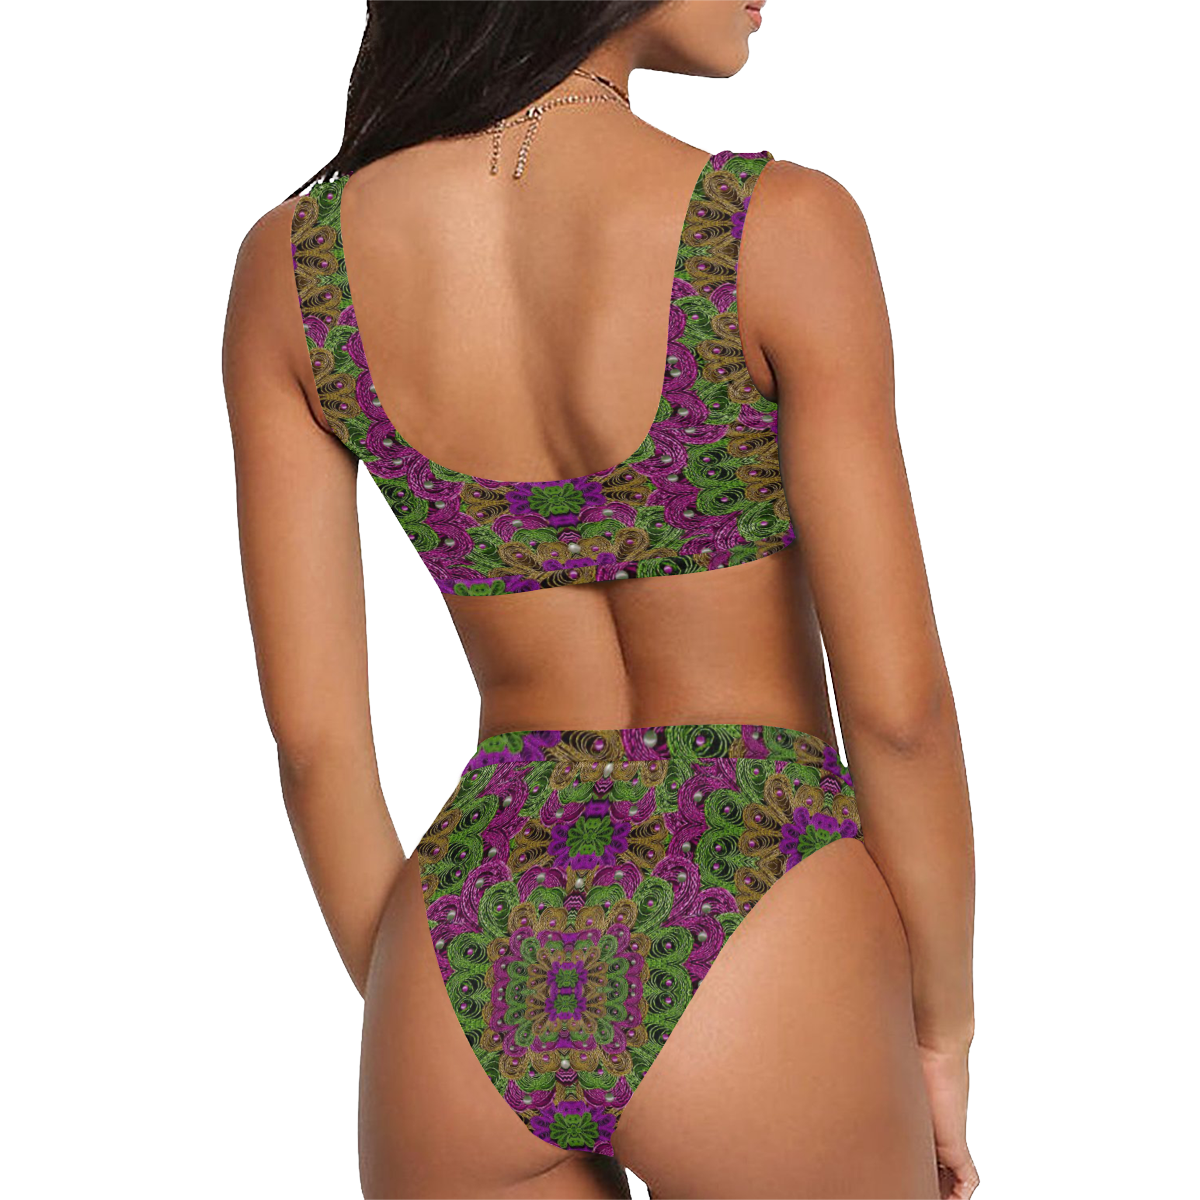 Peacock lace in the nature Sport Top & High-Waisted Bikini Swimsuit (Model S07)